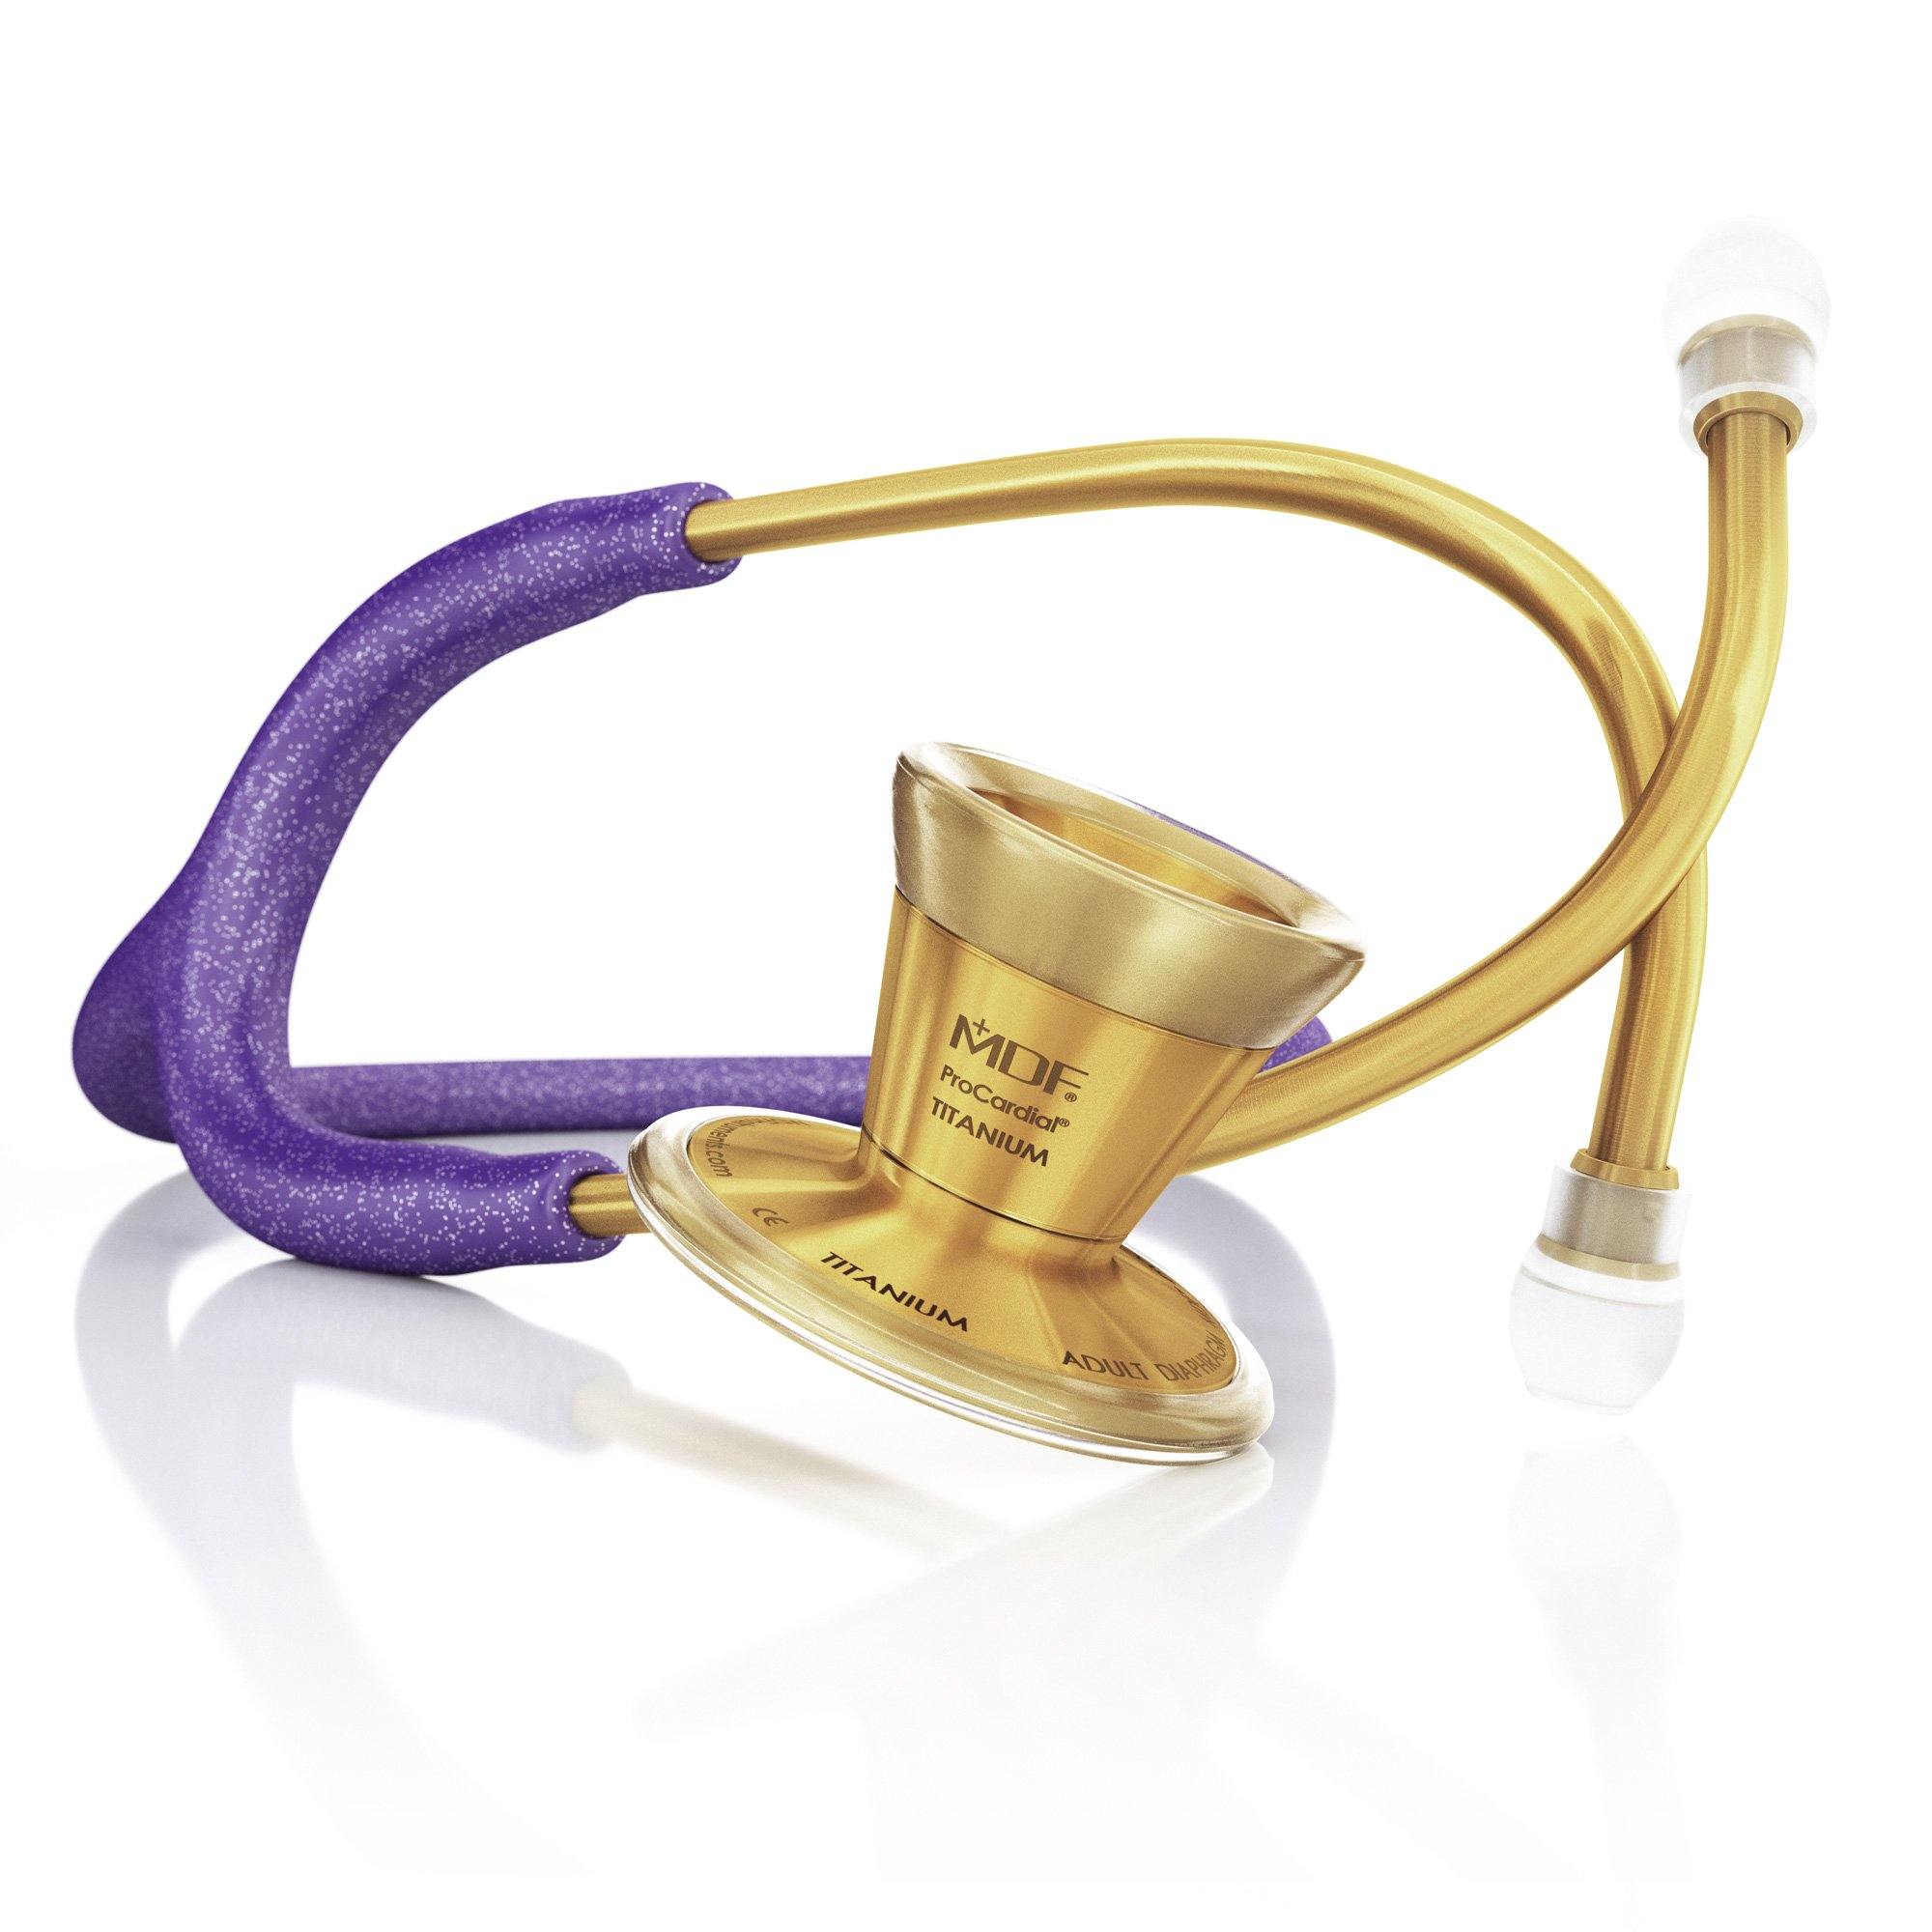 ProCardial® Titanium Cardiology Stethoscope - Purple Glitter/Gold - MDF Instruments Official Store - No - Stethoscope